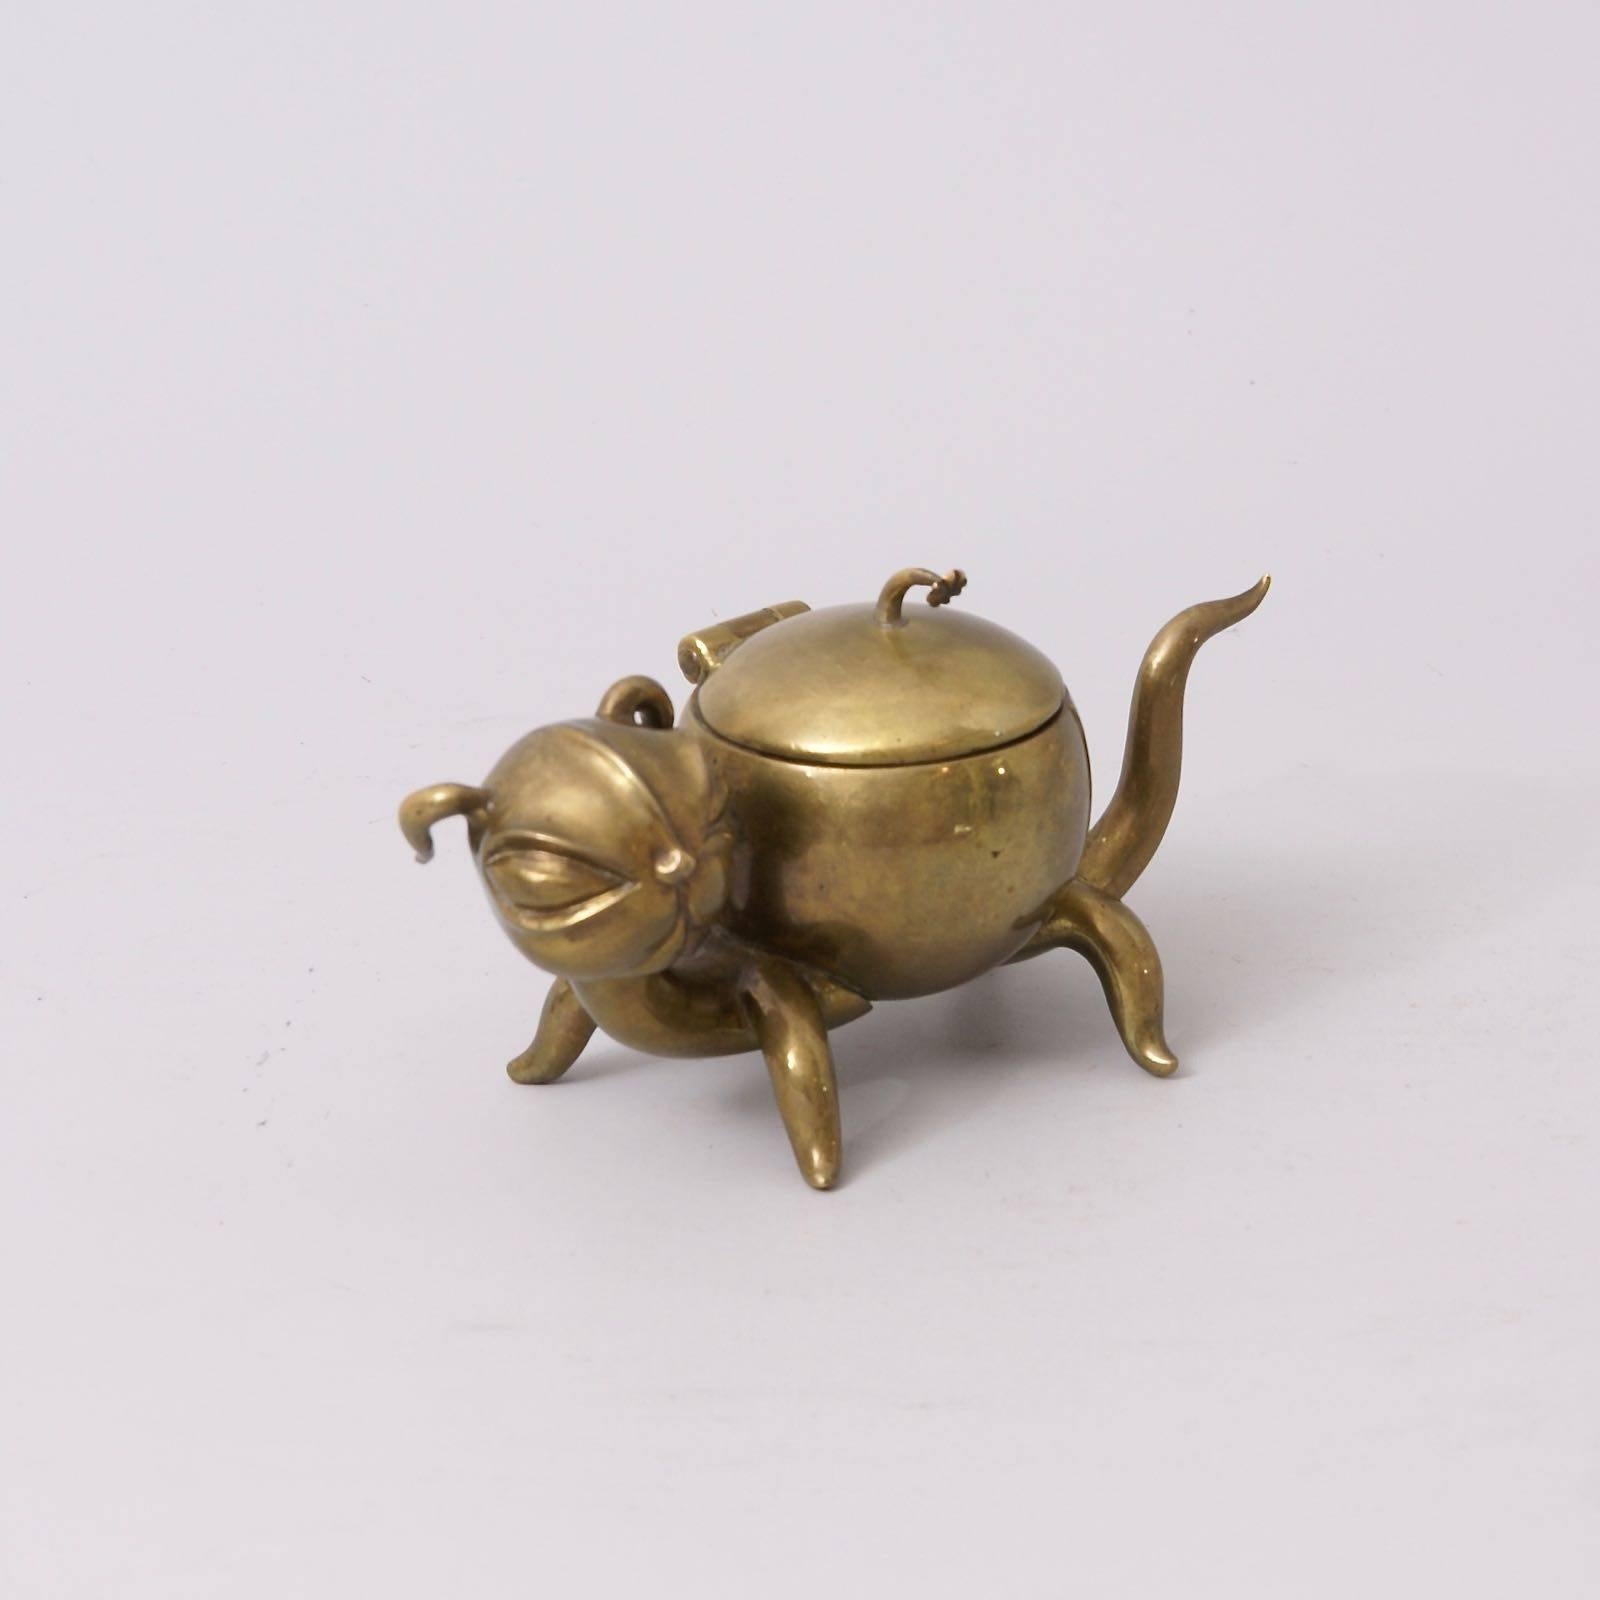 Humoristic cat shaped brass inkwell, with internal glass container, signed with the usual firm's stamp: 